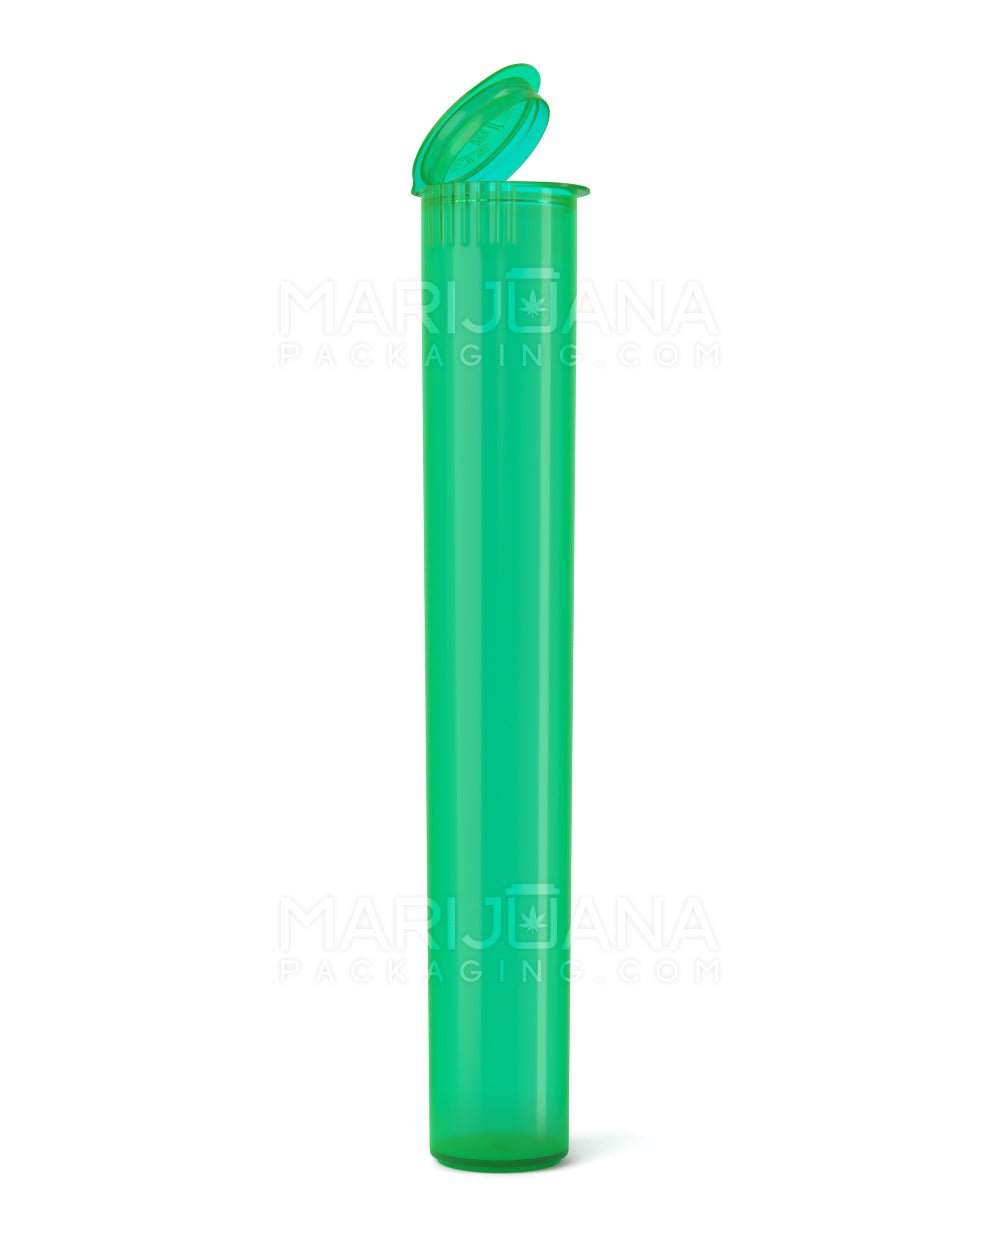 Child Resistant | King Size Pop Top Translucent Plastic Pre-Roll Tubes | 116mm - Green - 1000 Count - 1